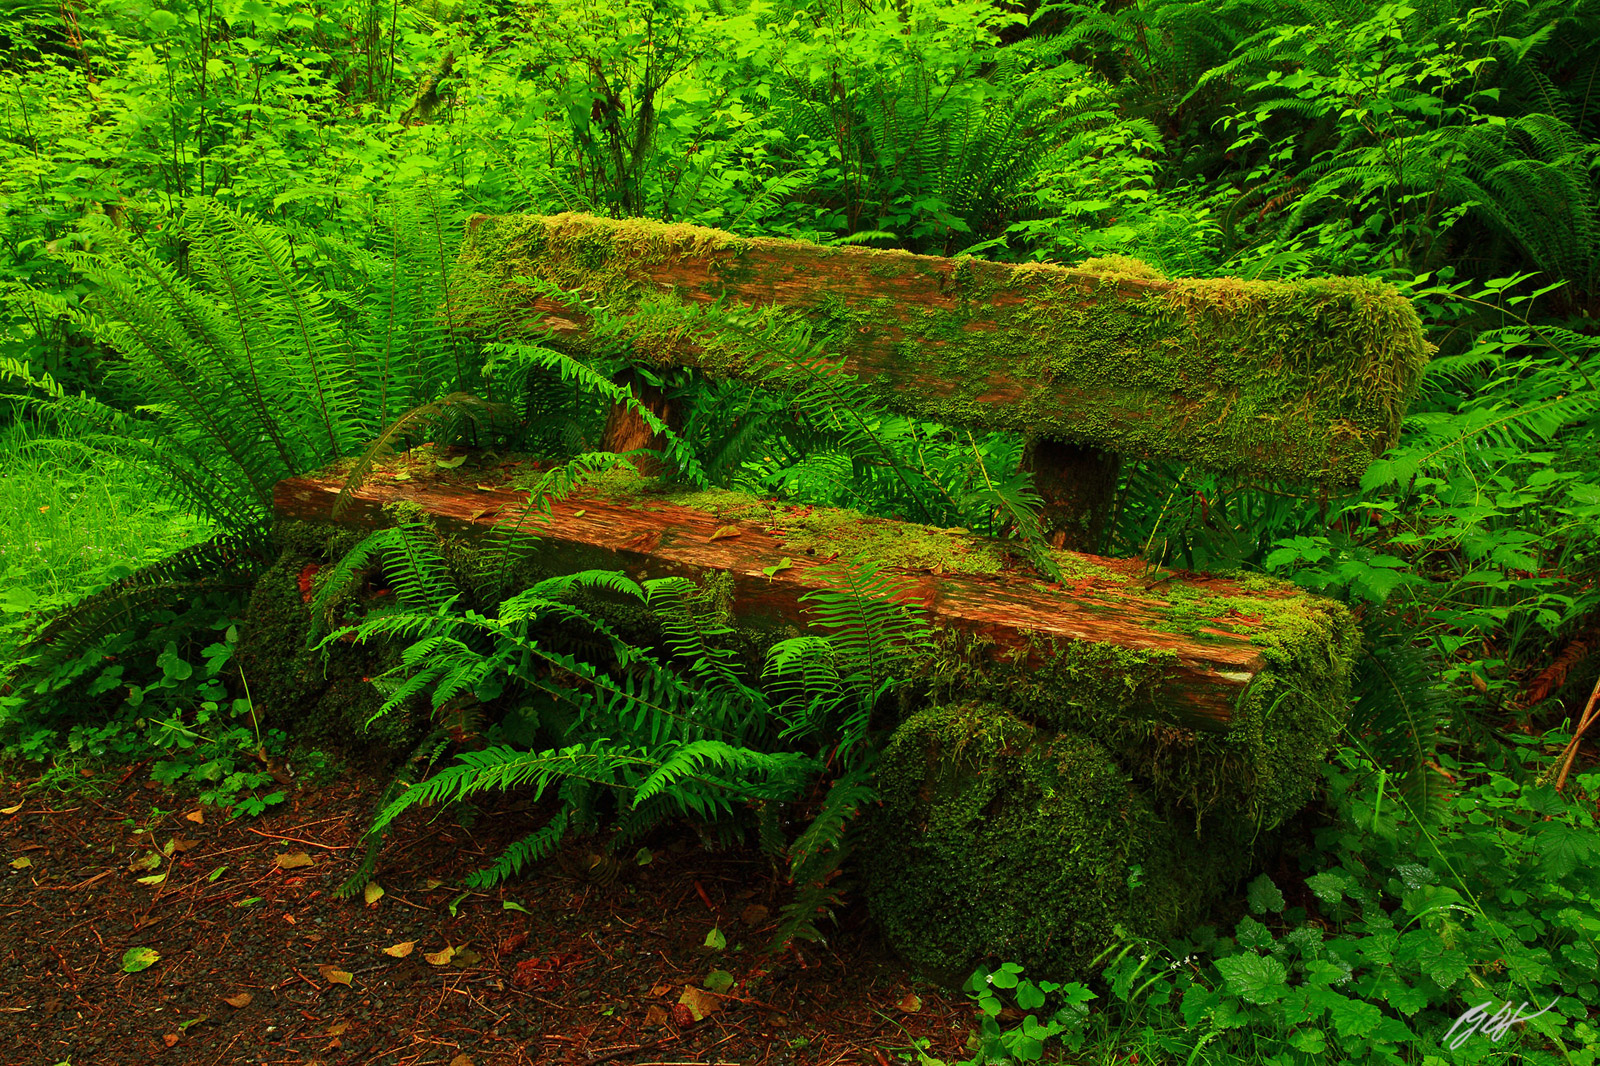 Mossy Bench in the Quinault Rainforest in Olympic National Park in Washington